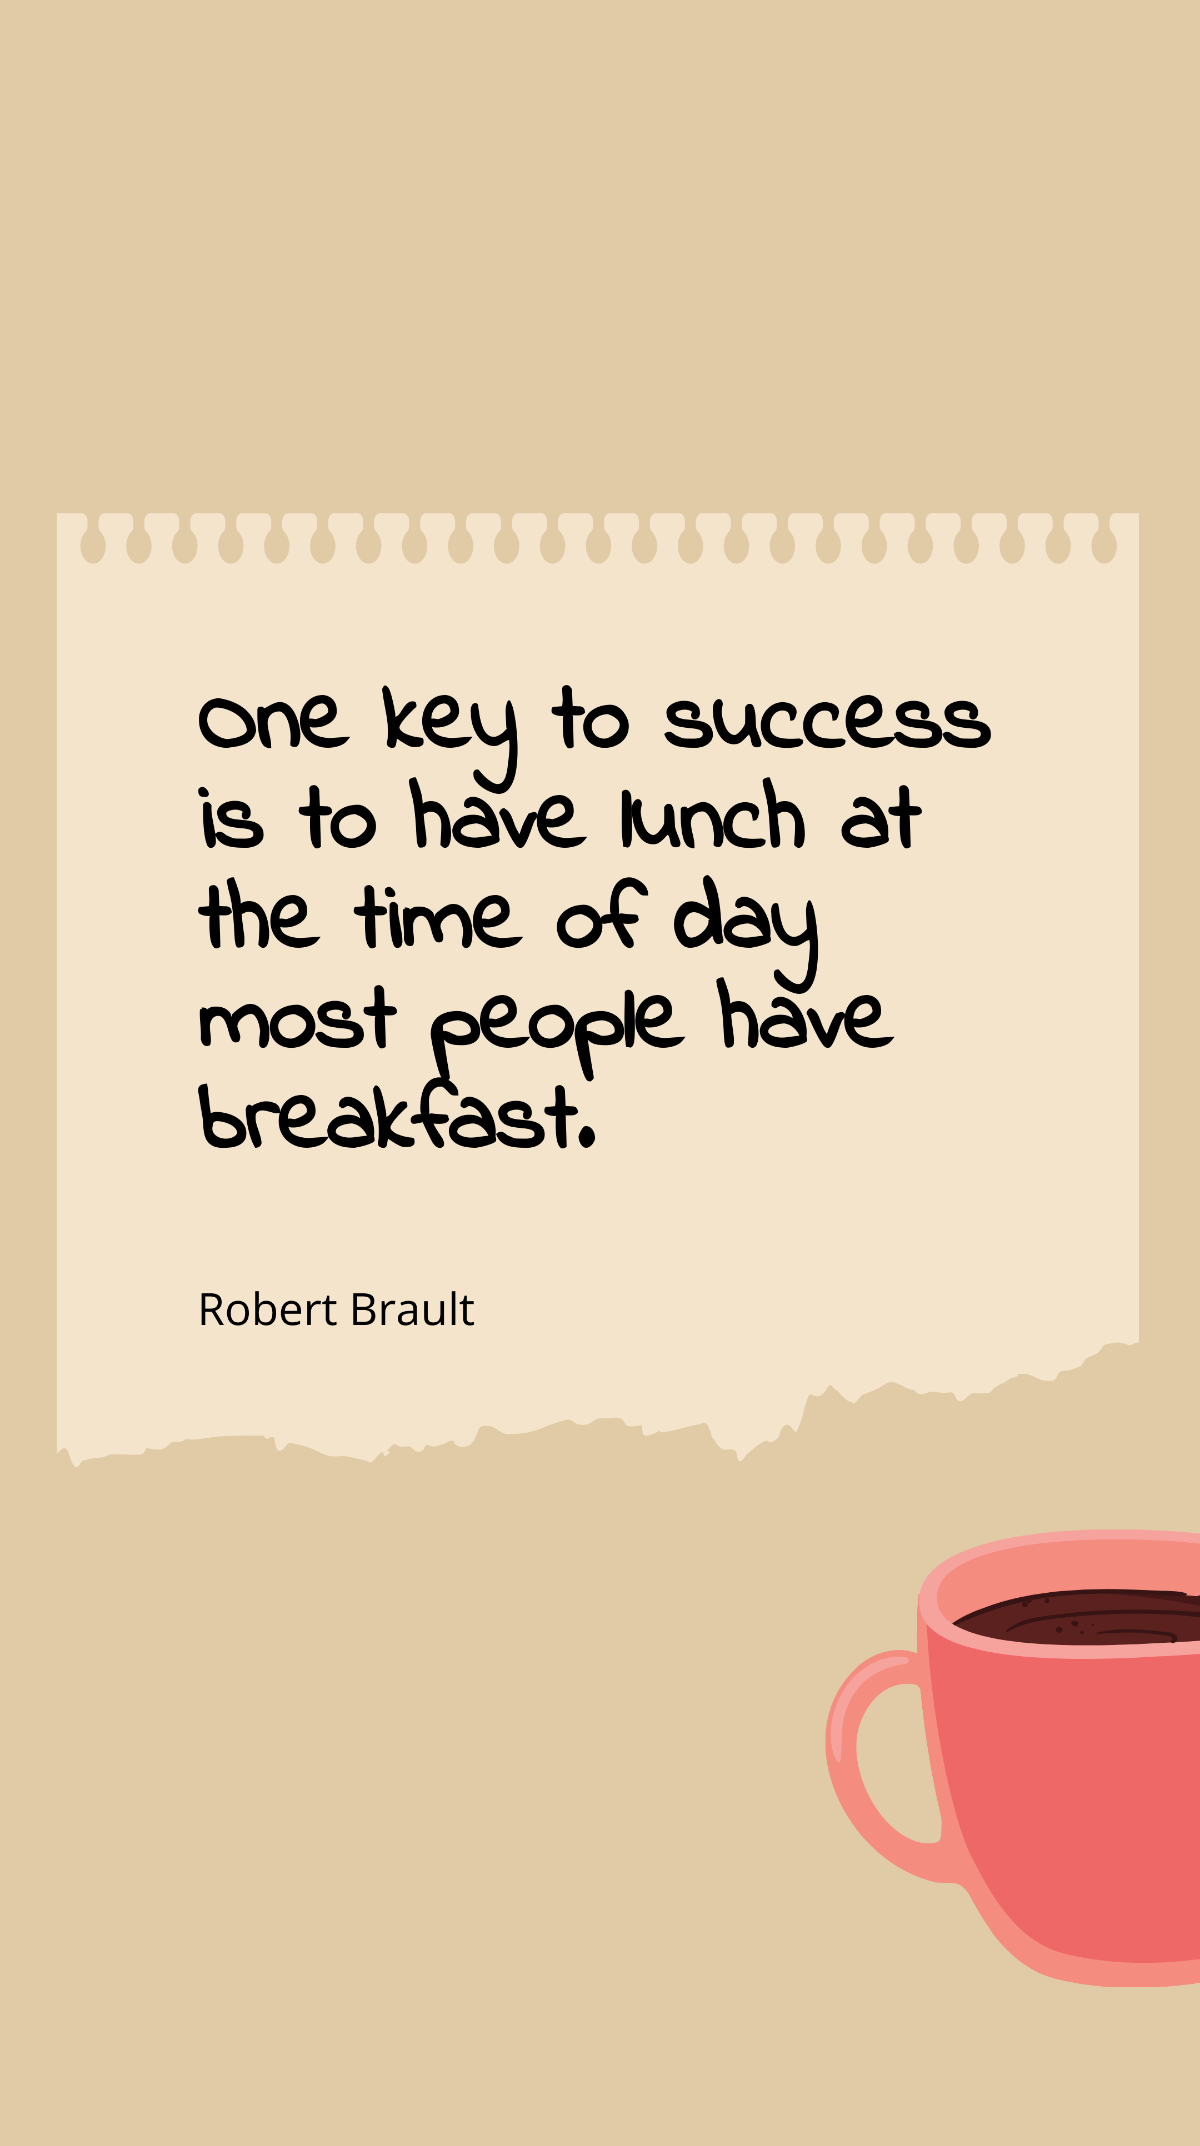 Robert Brault - One key to success is to have lunch at the time of day most people have breakfast. Template